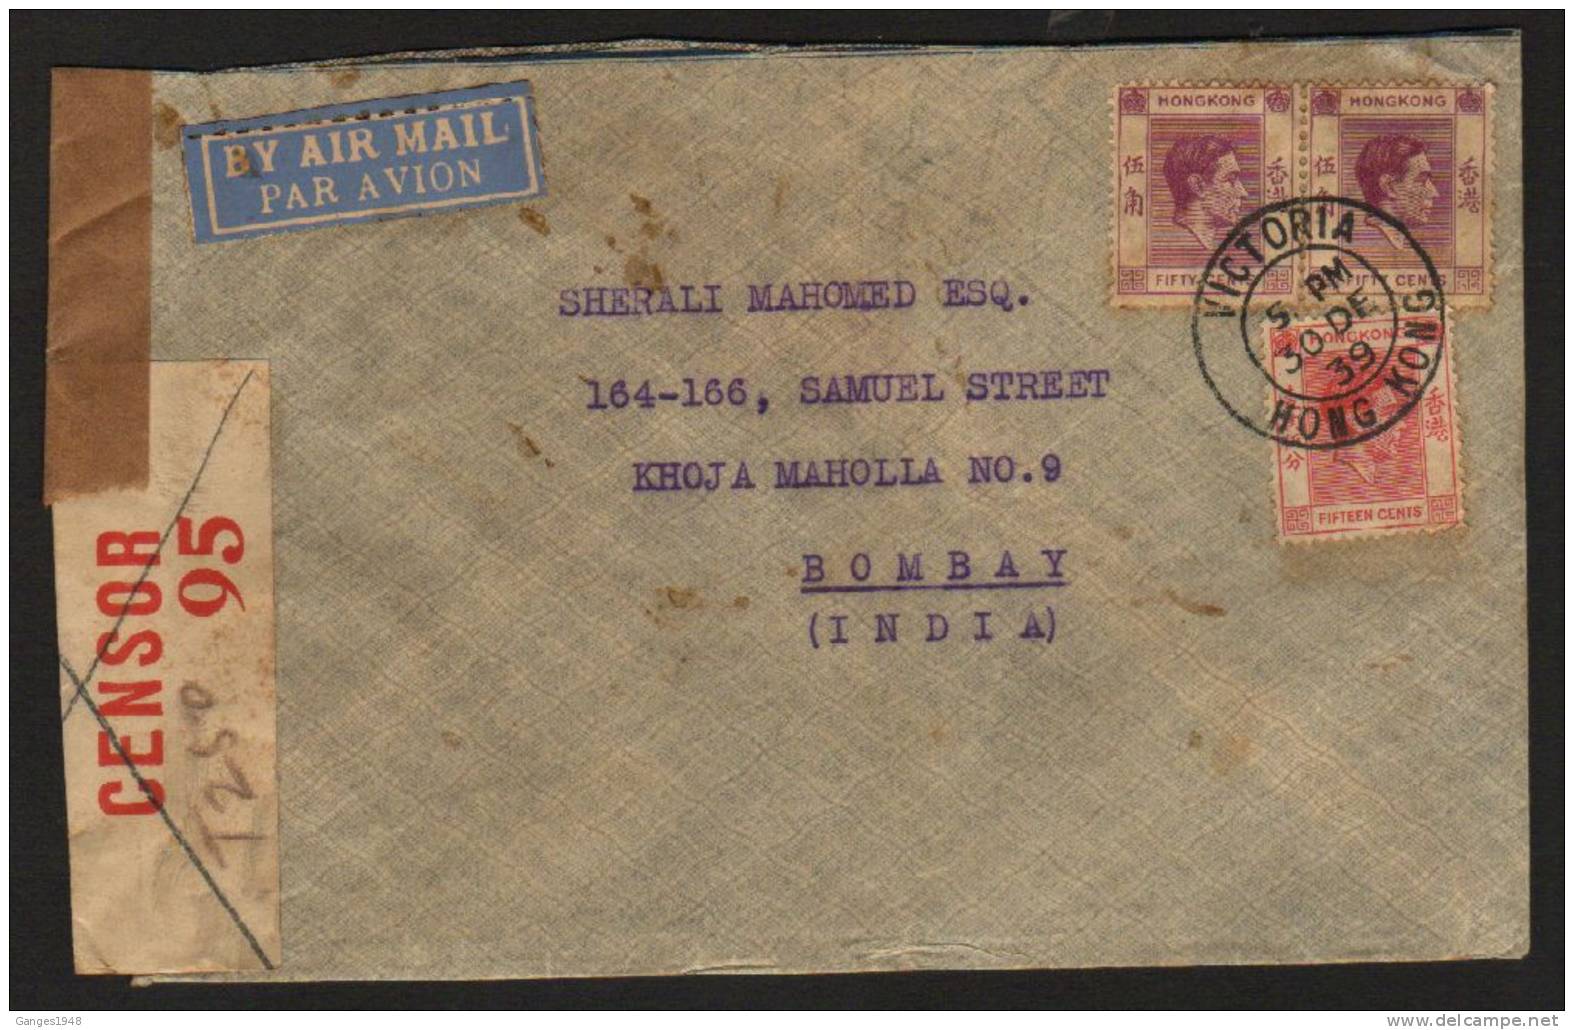 30 DE 39 HONG KONG KG VI  $1.15 Rate AIR MAIL  Cover To India ARRIVAL CENSOR # 25238 - Storia Postale